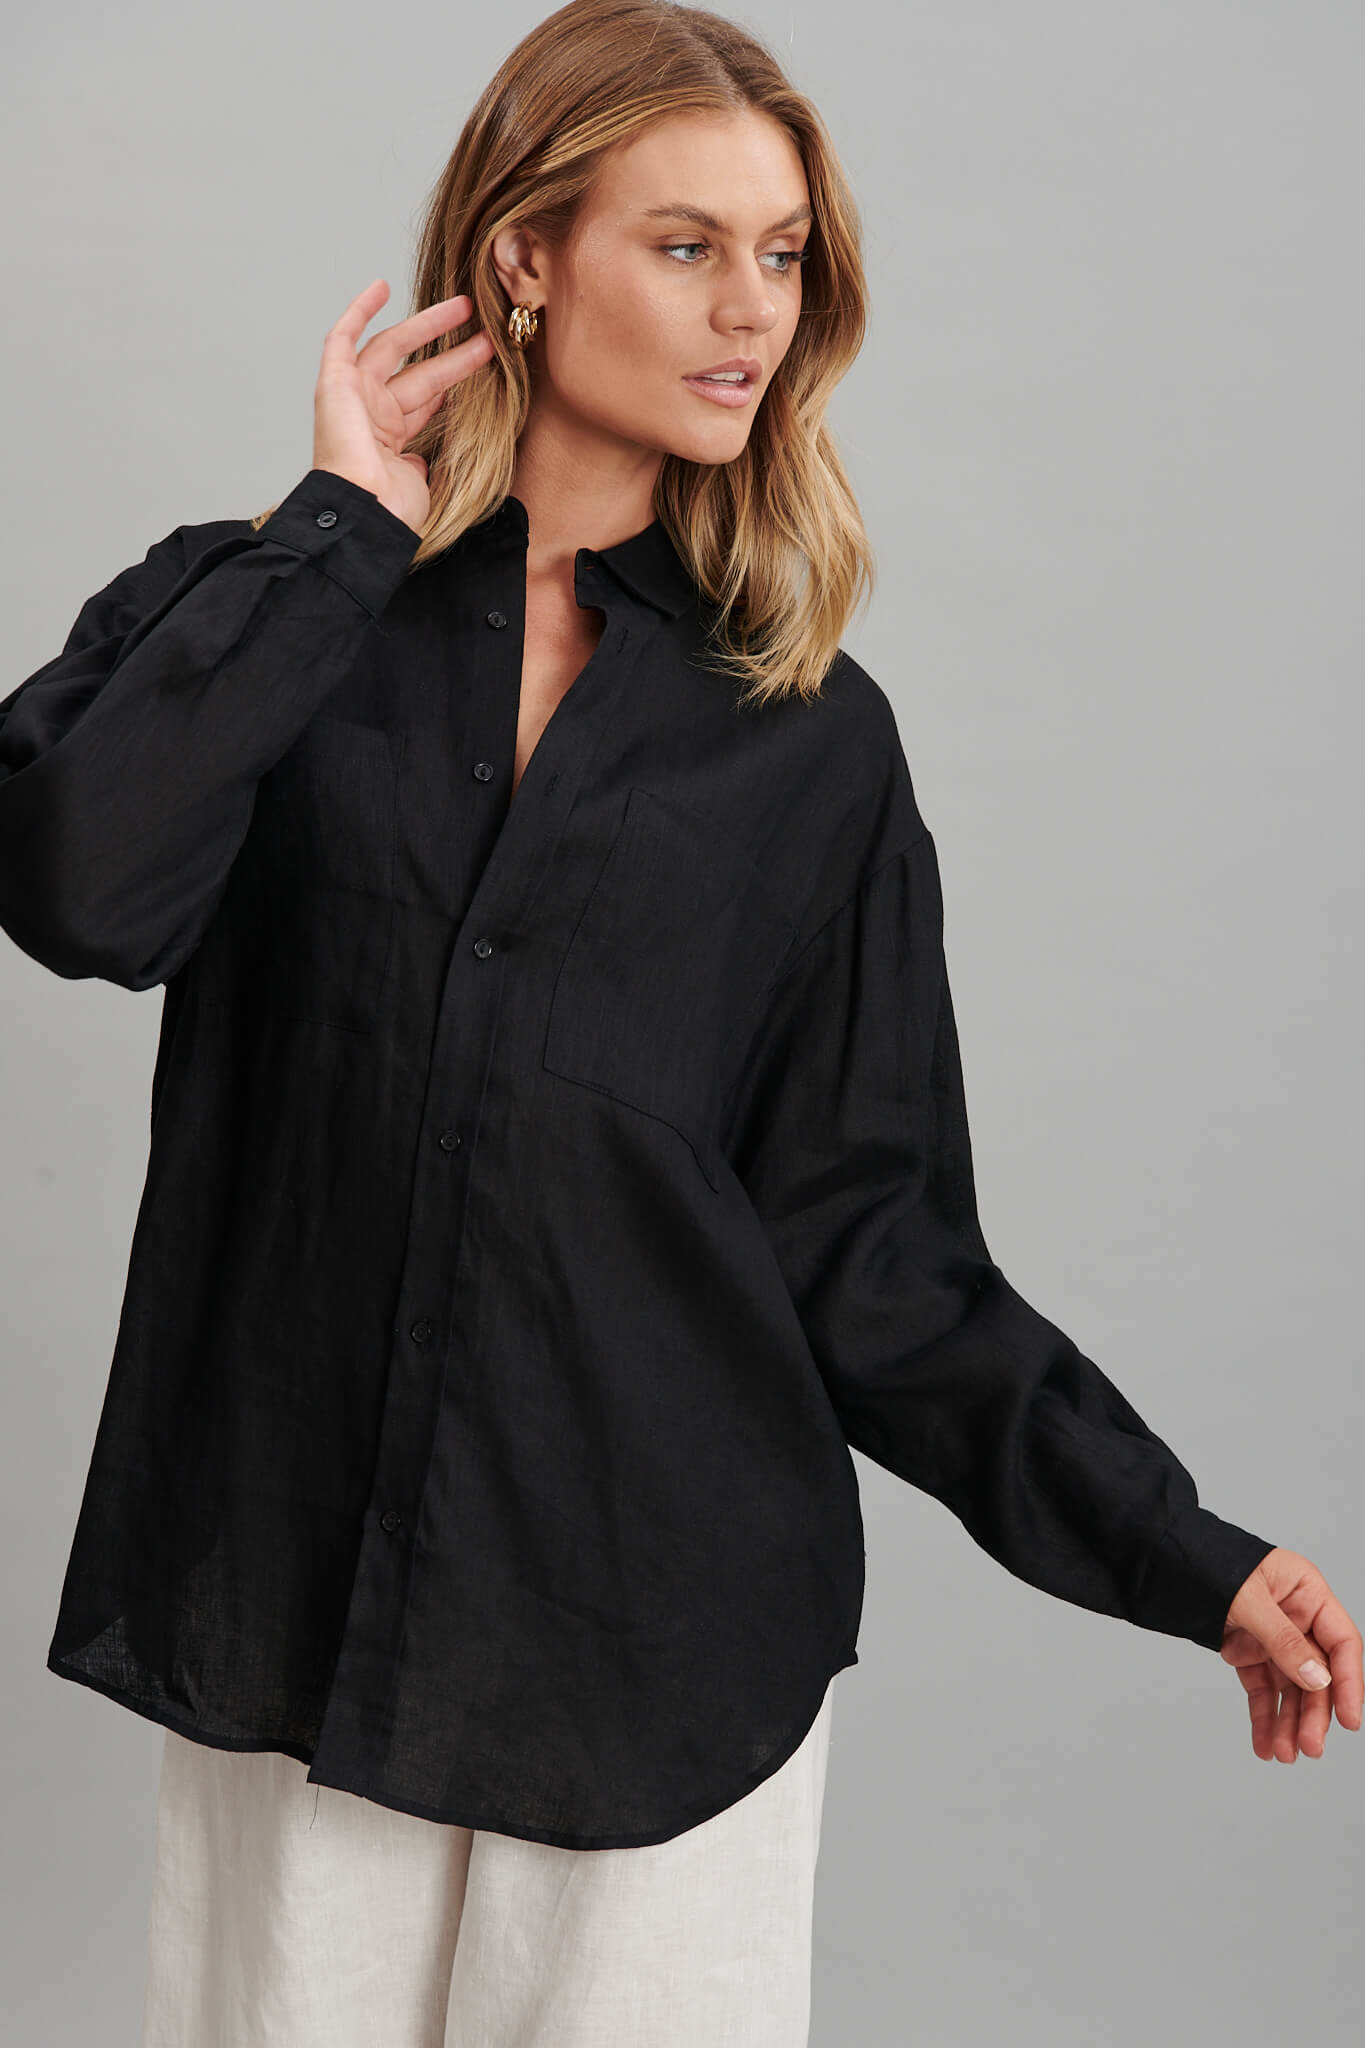 Yola Shirt In Black Pure Linen - front